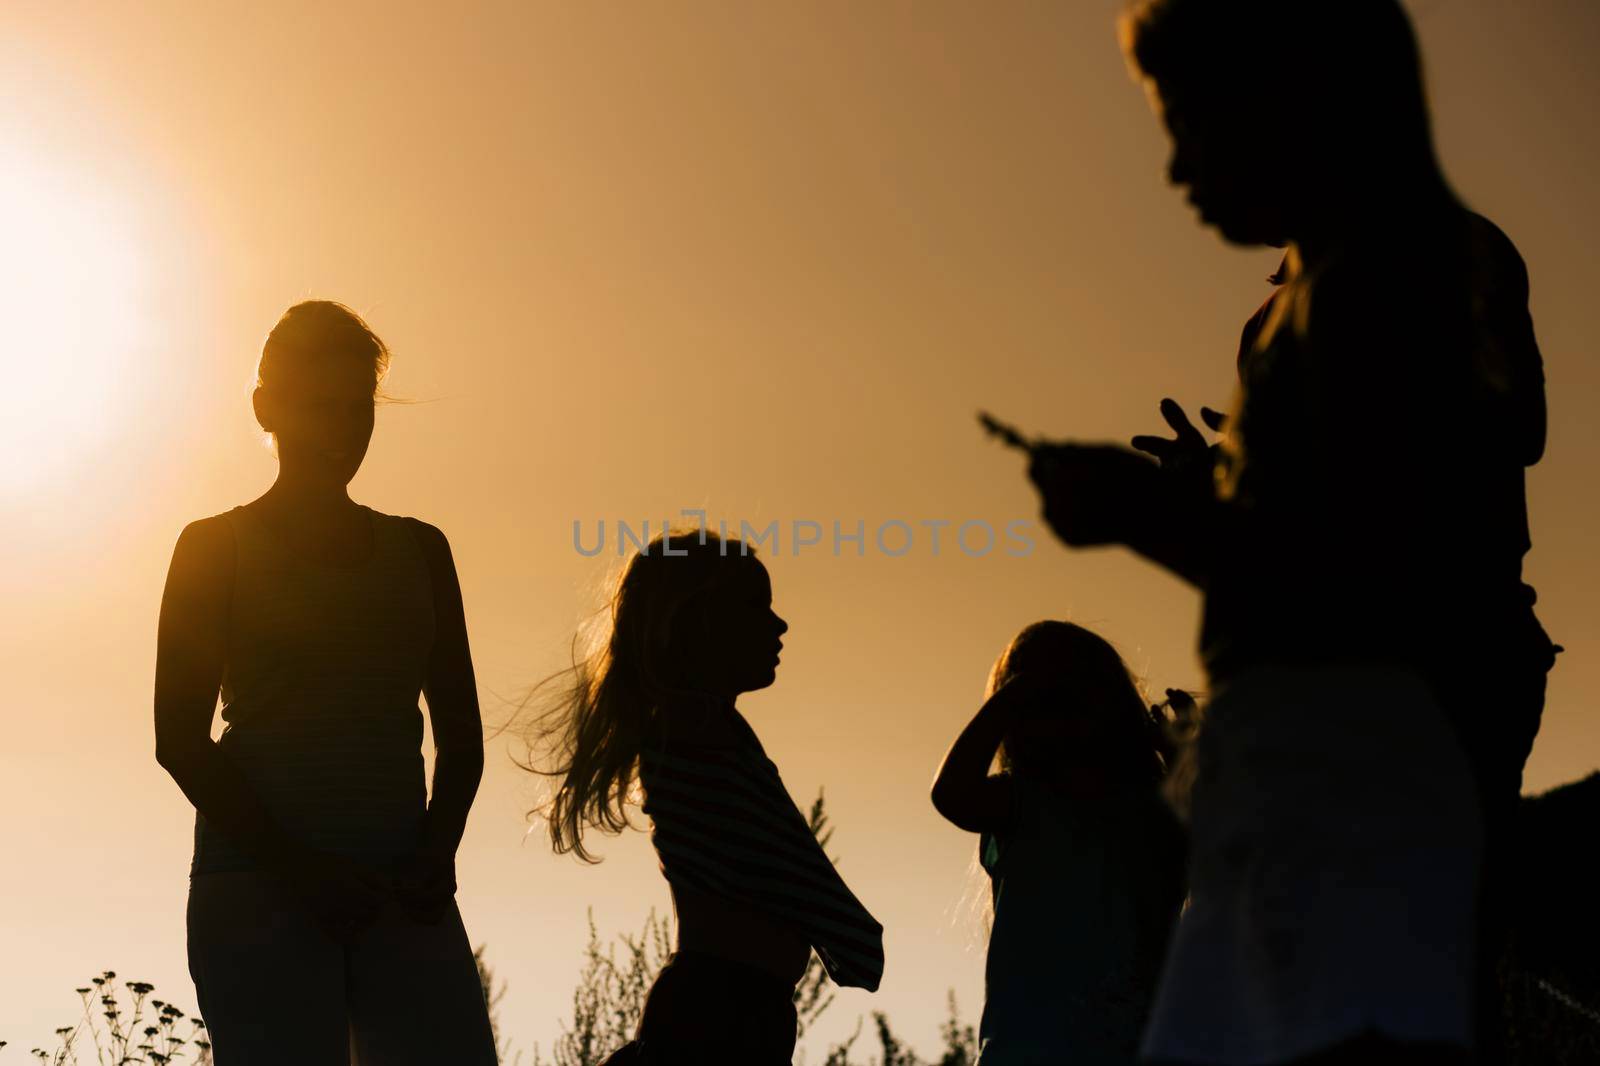 Family standing in strong back light leaving a silhouette and a very dreamy mood in the picture